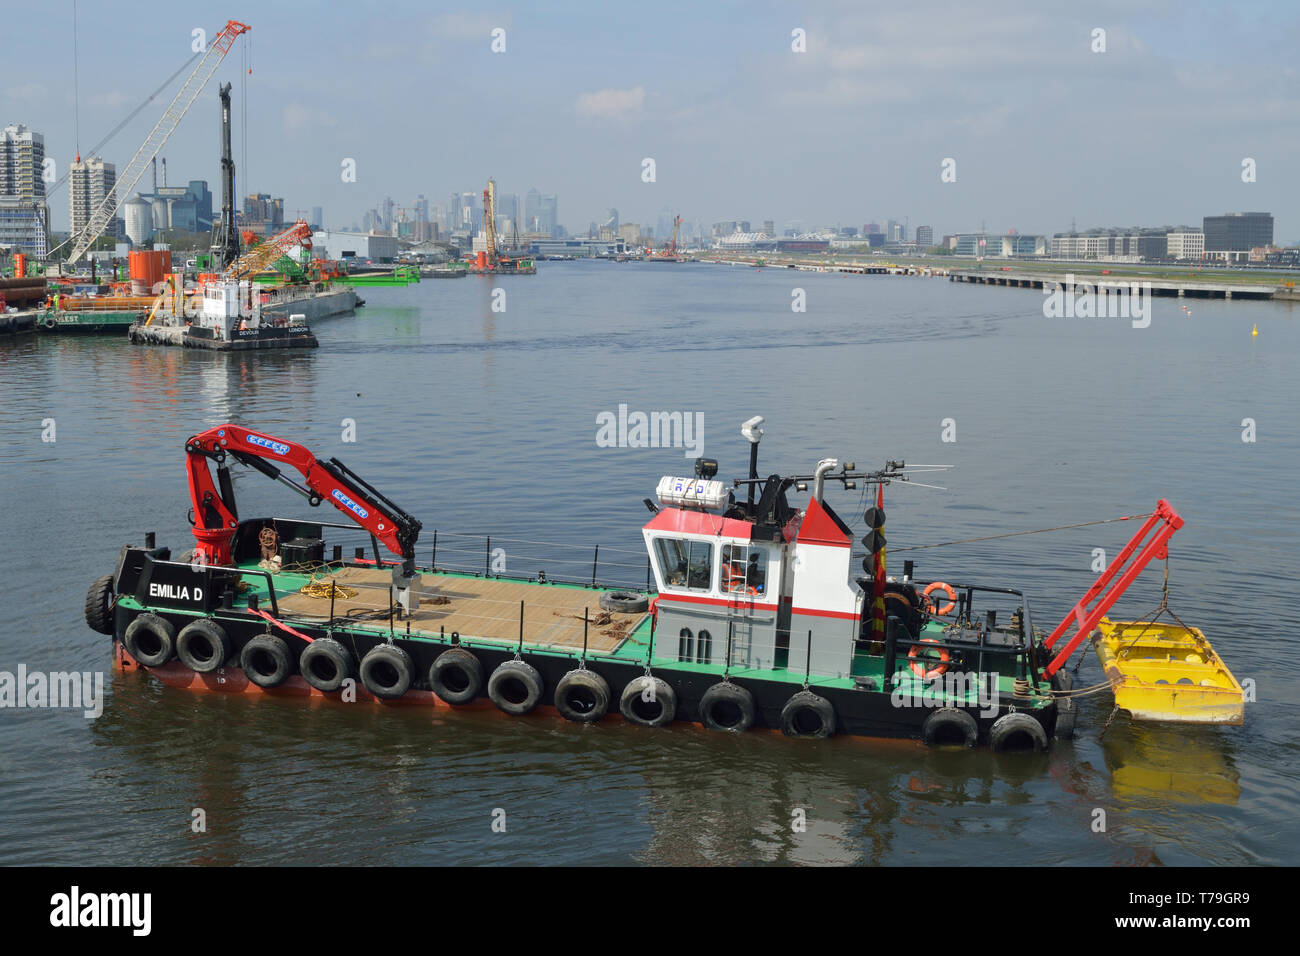 Multicat Emilia D undertaking dredging work in the King George V Dock, London, as part of the London City Airport CADP development programme Stock Photo